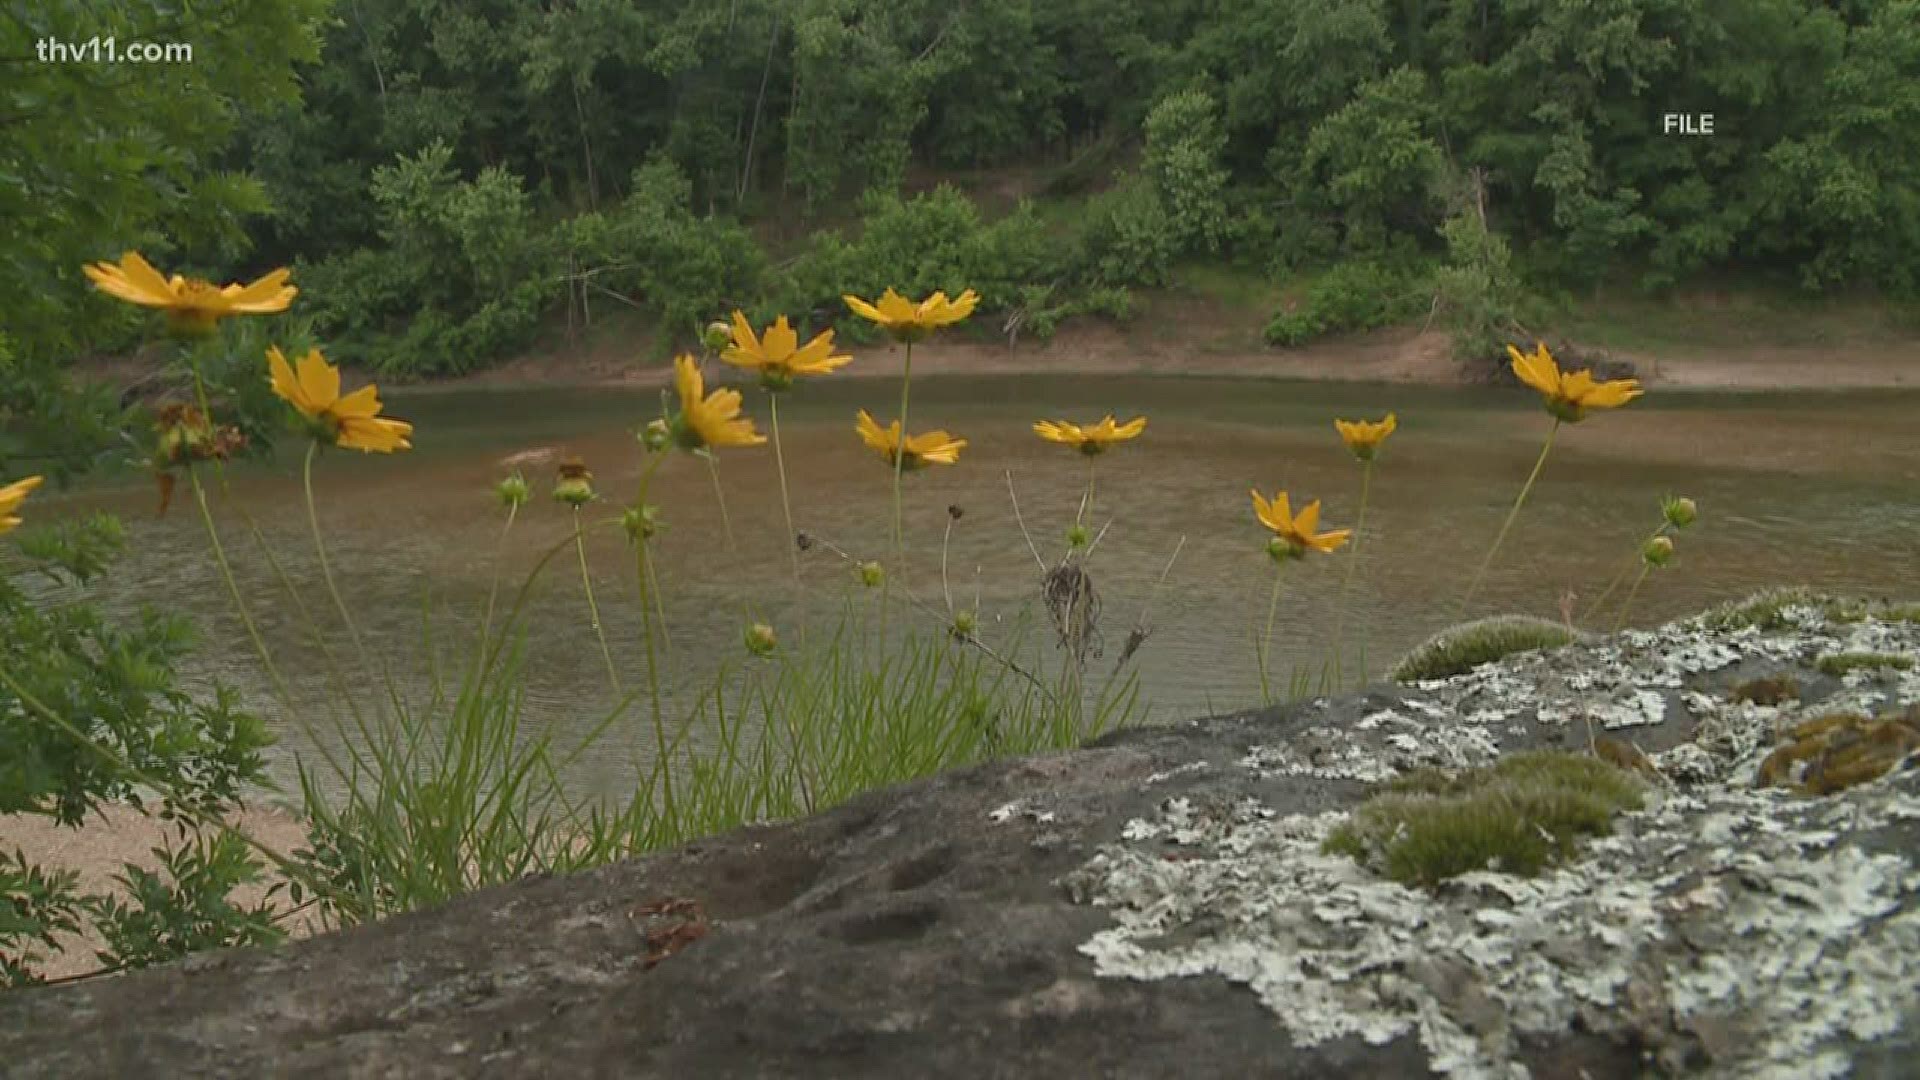 A teenager drowned on the Buffalo River over the holiday weekend. According to outdoor experts, it could've happened to anyone.